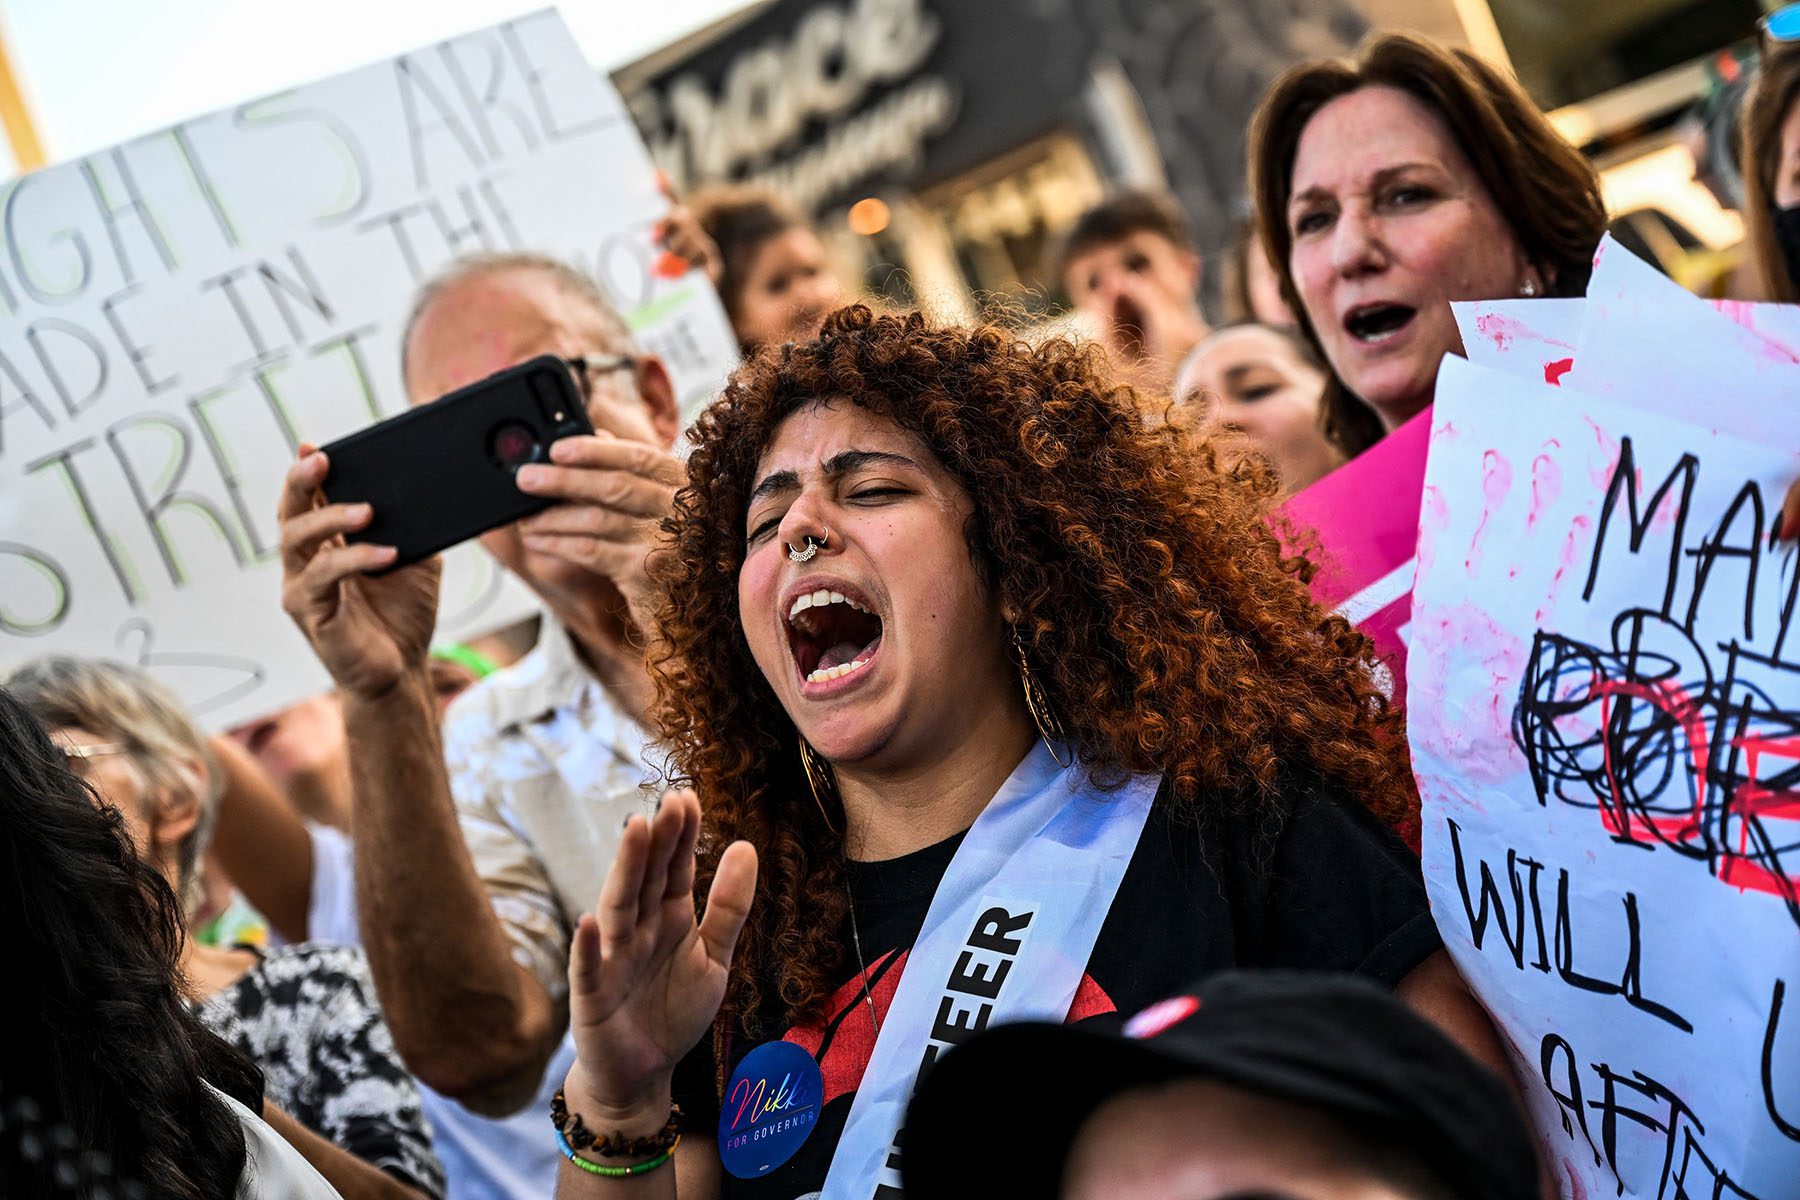 Abortion rights activists shout slogans as they rally in Miami, Florida.